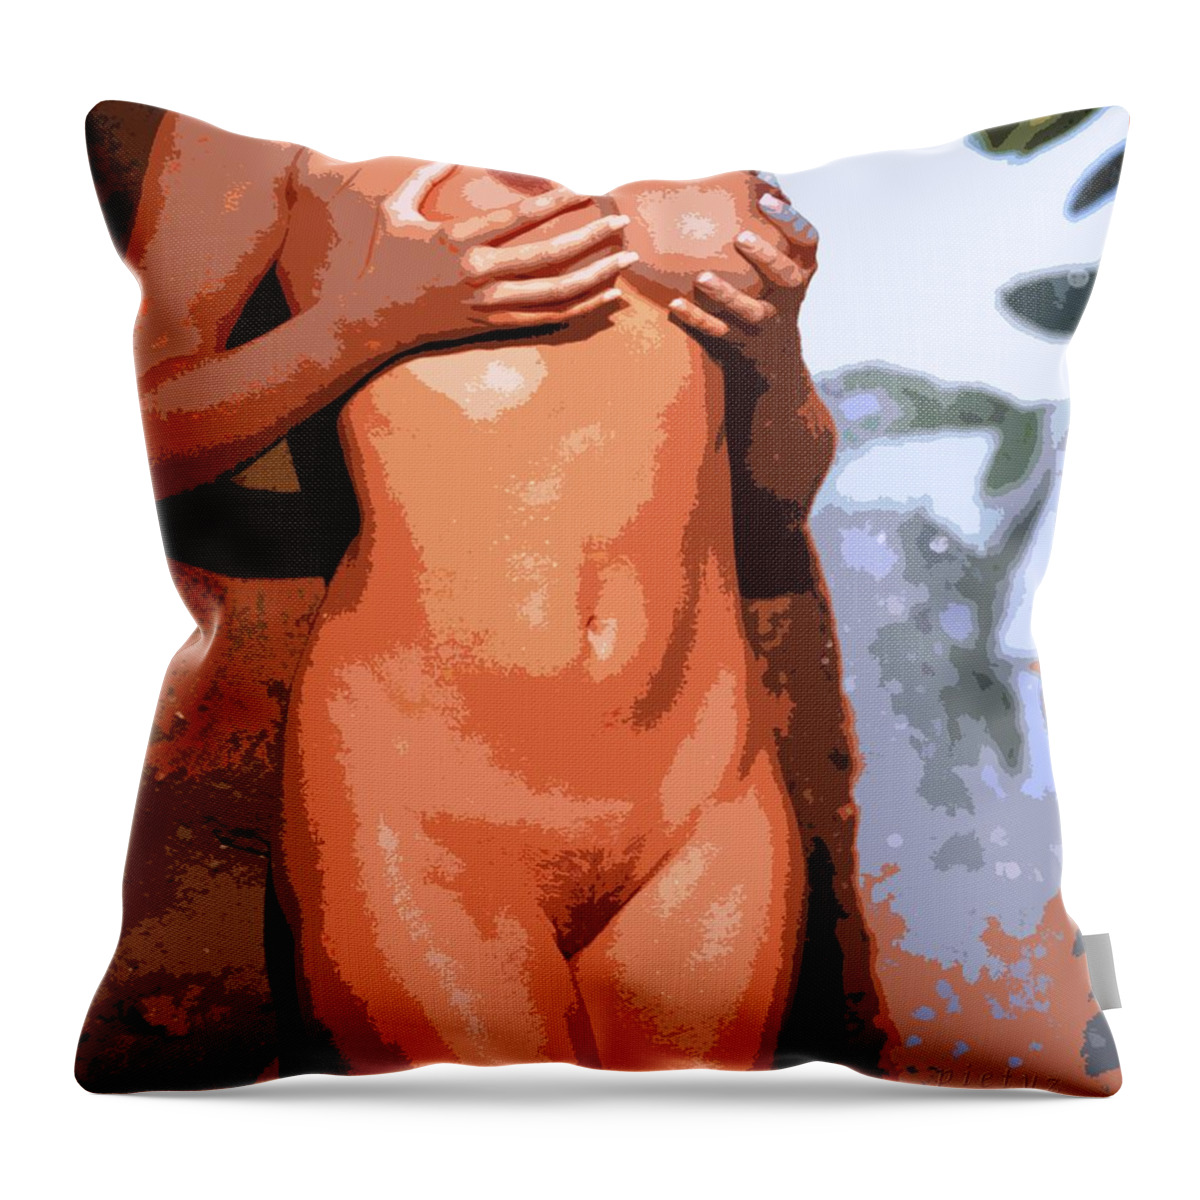 Nudes Throw Pillow featuring the painting Handz Up by Piety Dsilva